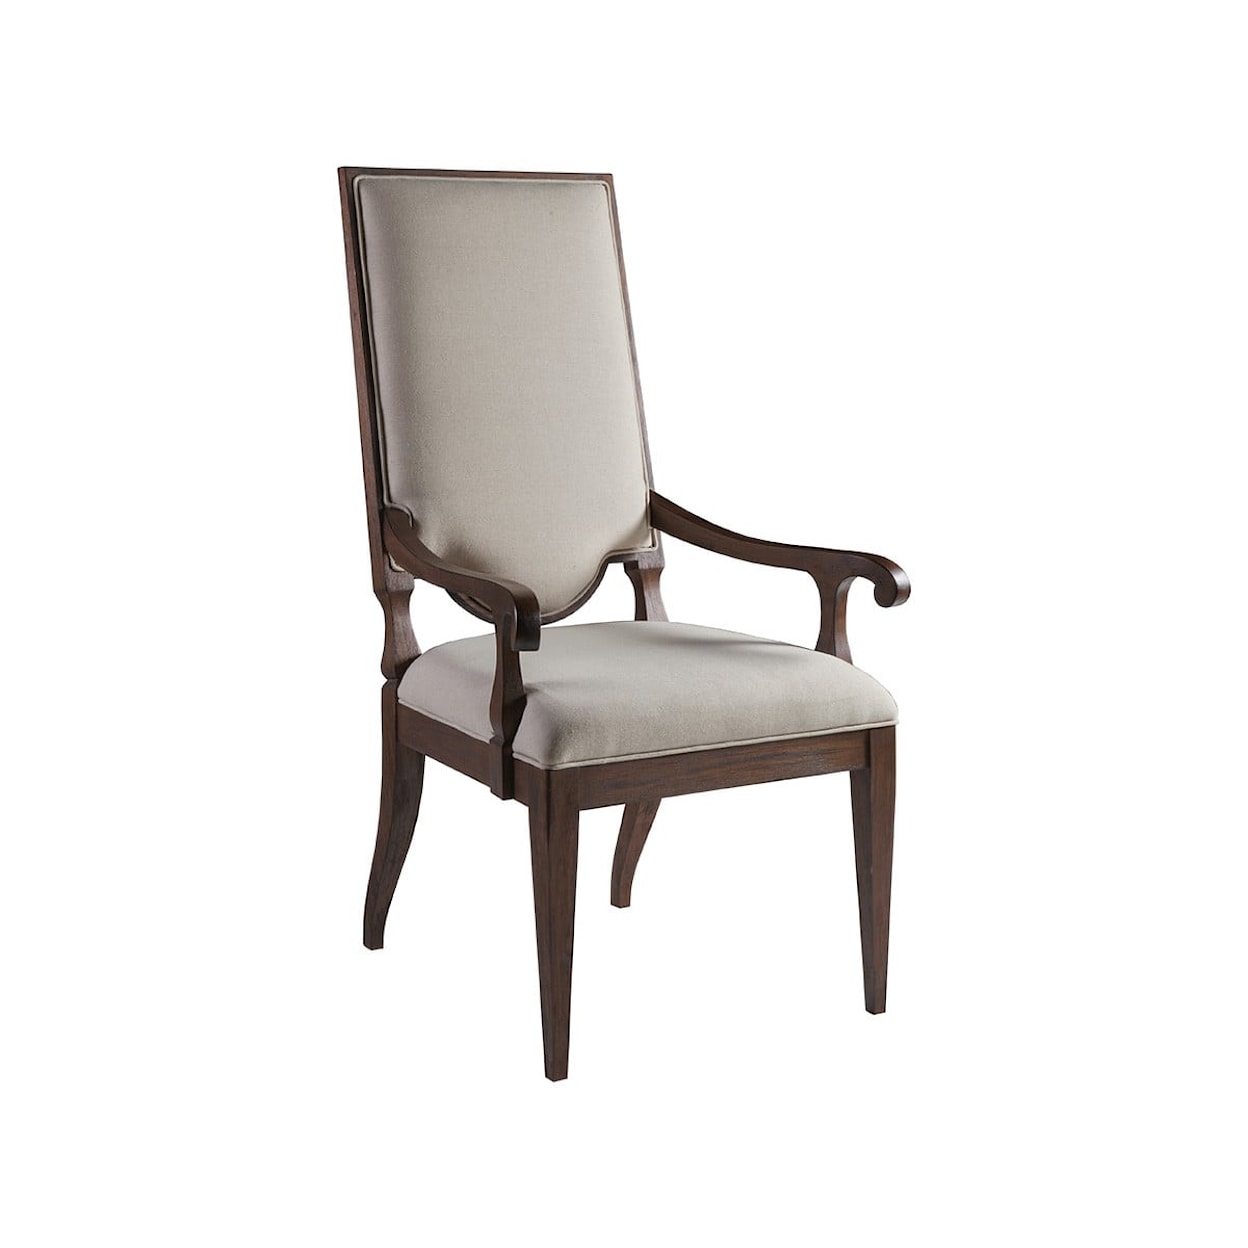 Artistica Cohesion Beauvoir Upholstered Arm Chair